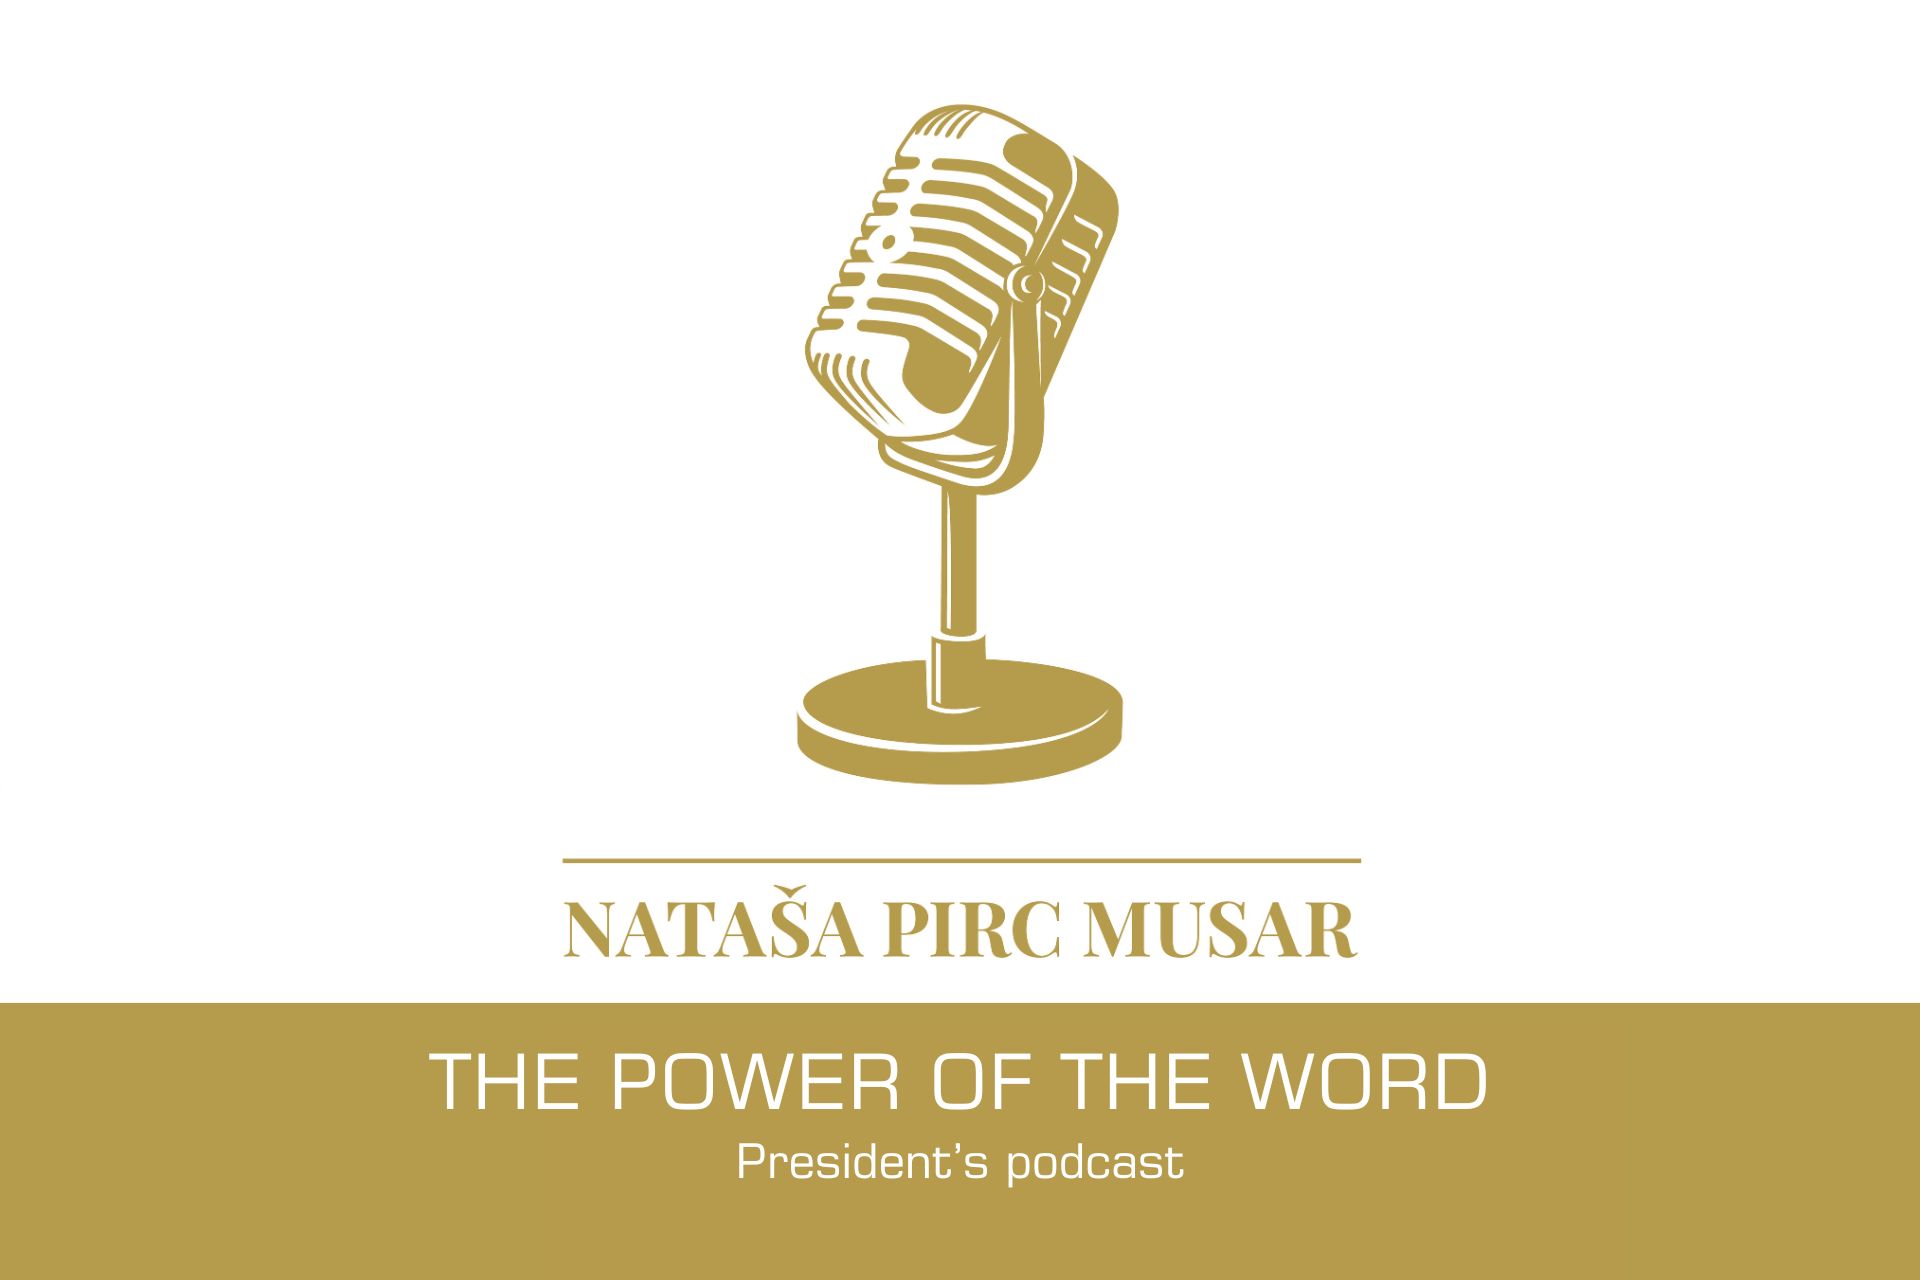 President's podcast The Power of the Word